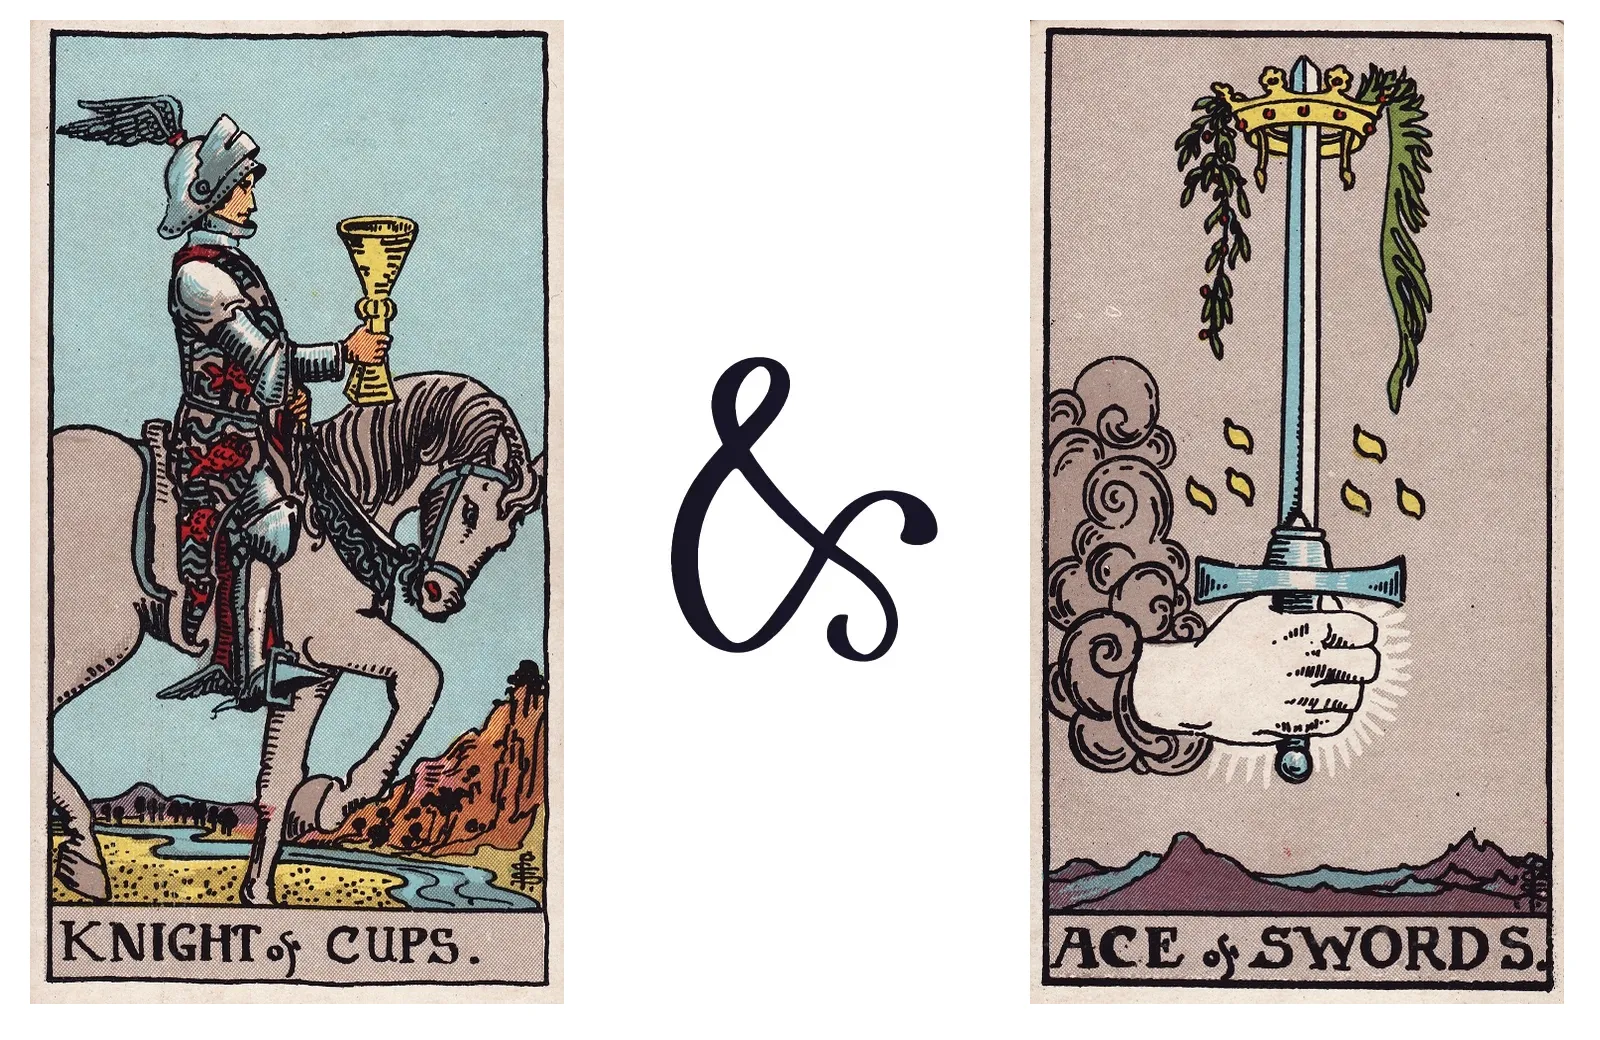 Knight of Cups and Ace of Swords